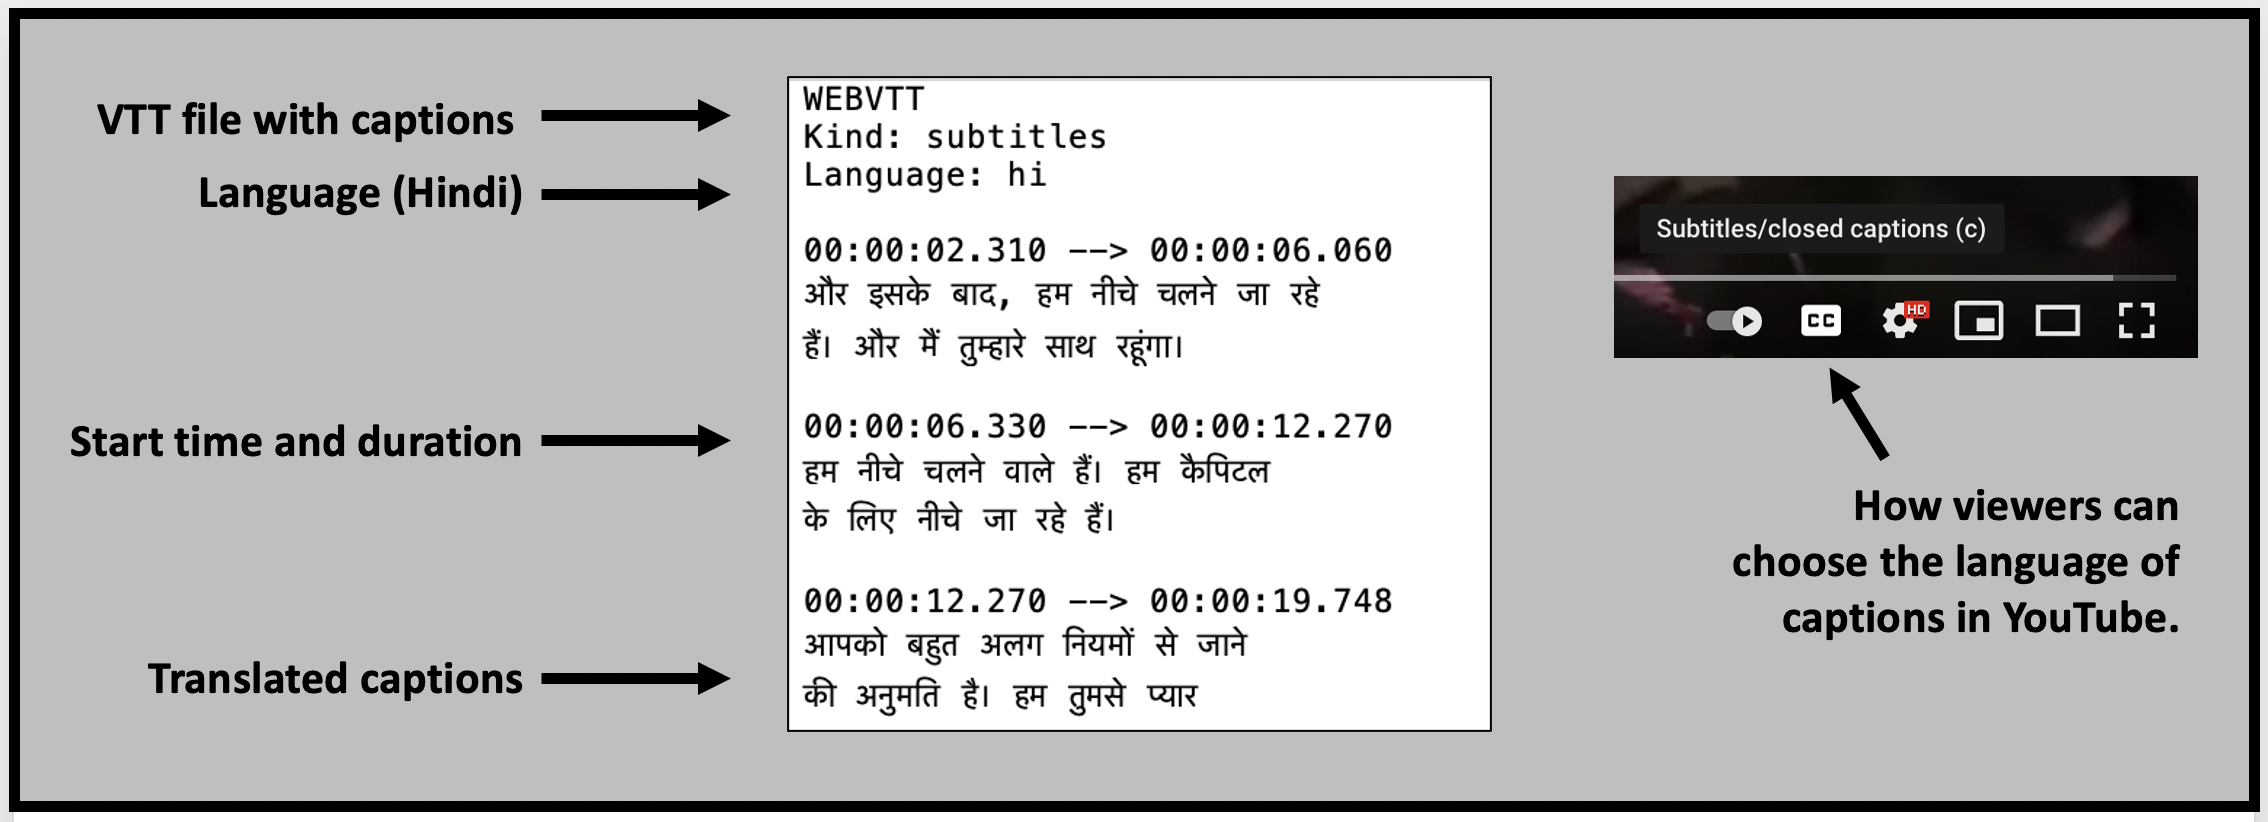 Web Video Text Tracks (WebVTT) files contain supplementary information about a web video, including subtitles, captions, descriptions, chapters, and metadata.